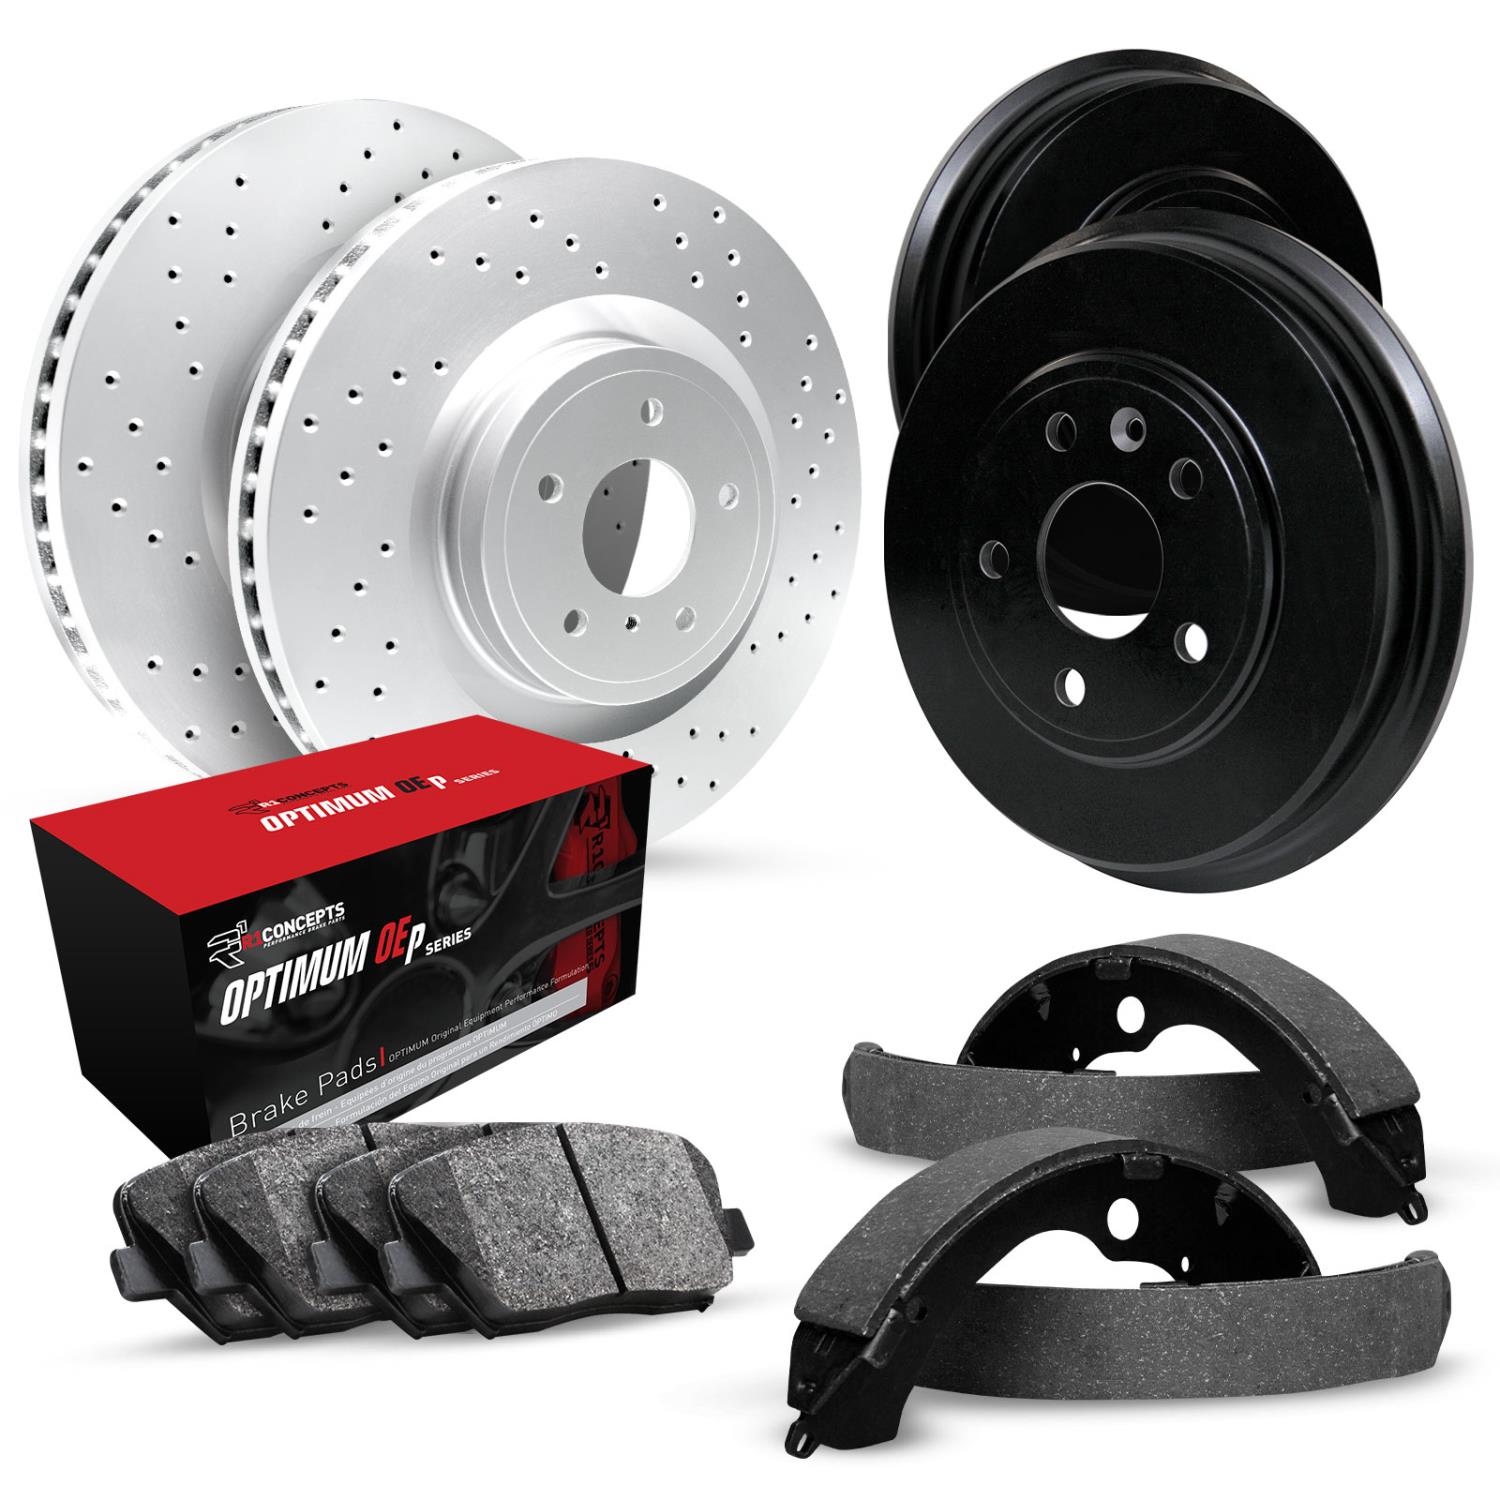 GEO-Carbon Drilled Brake Rotor & Drum Set w/Optimum OE Pads & Shoes, 1998-2003 GM, Position: Front & Rear